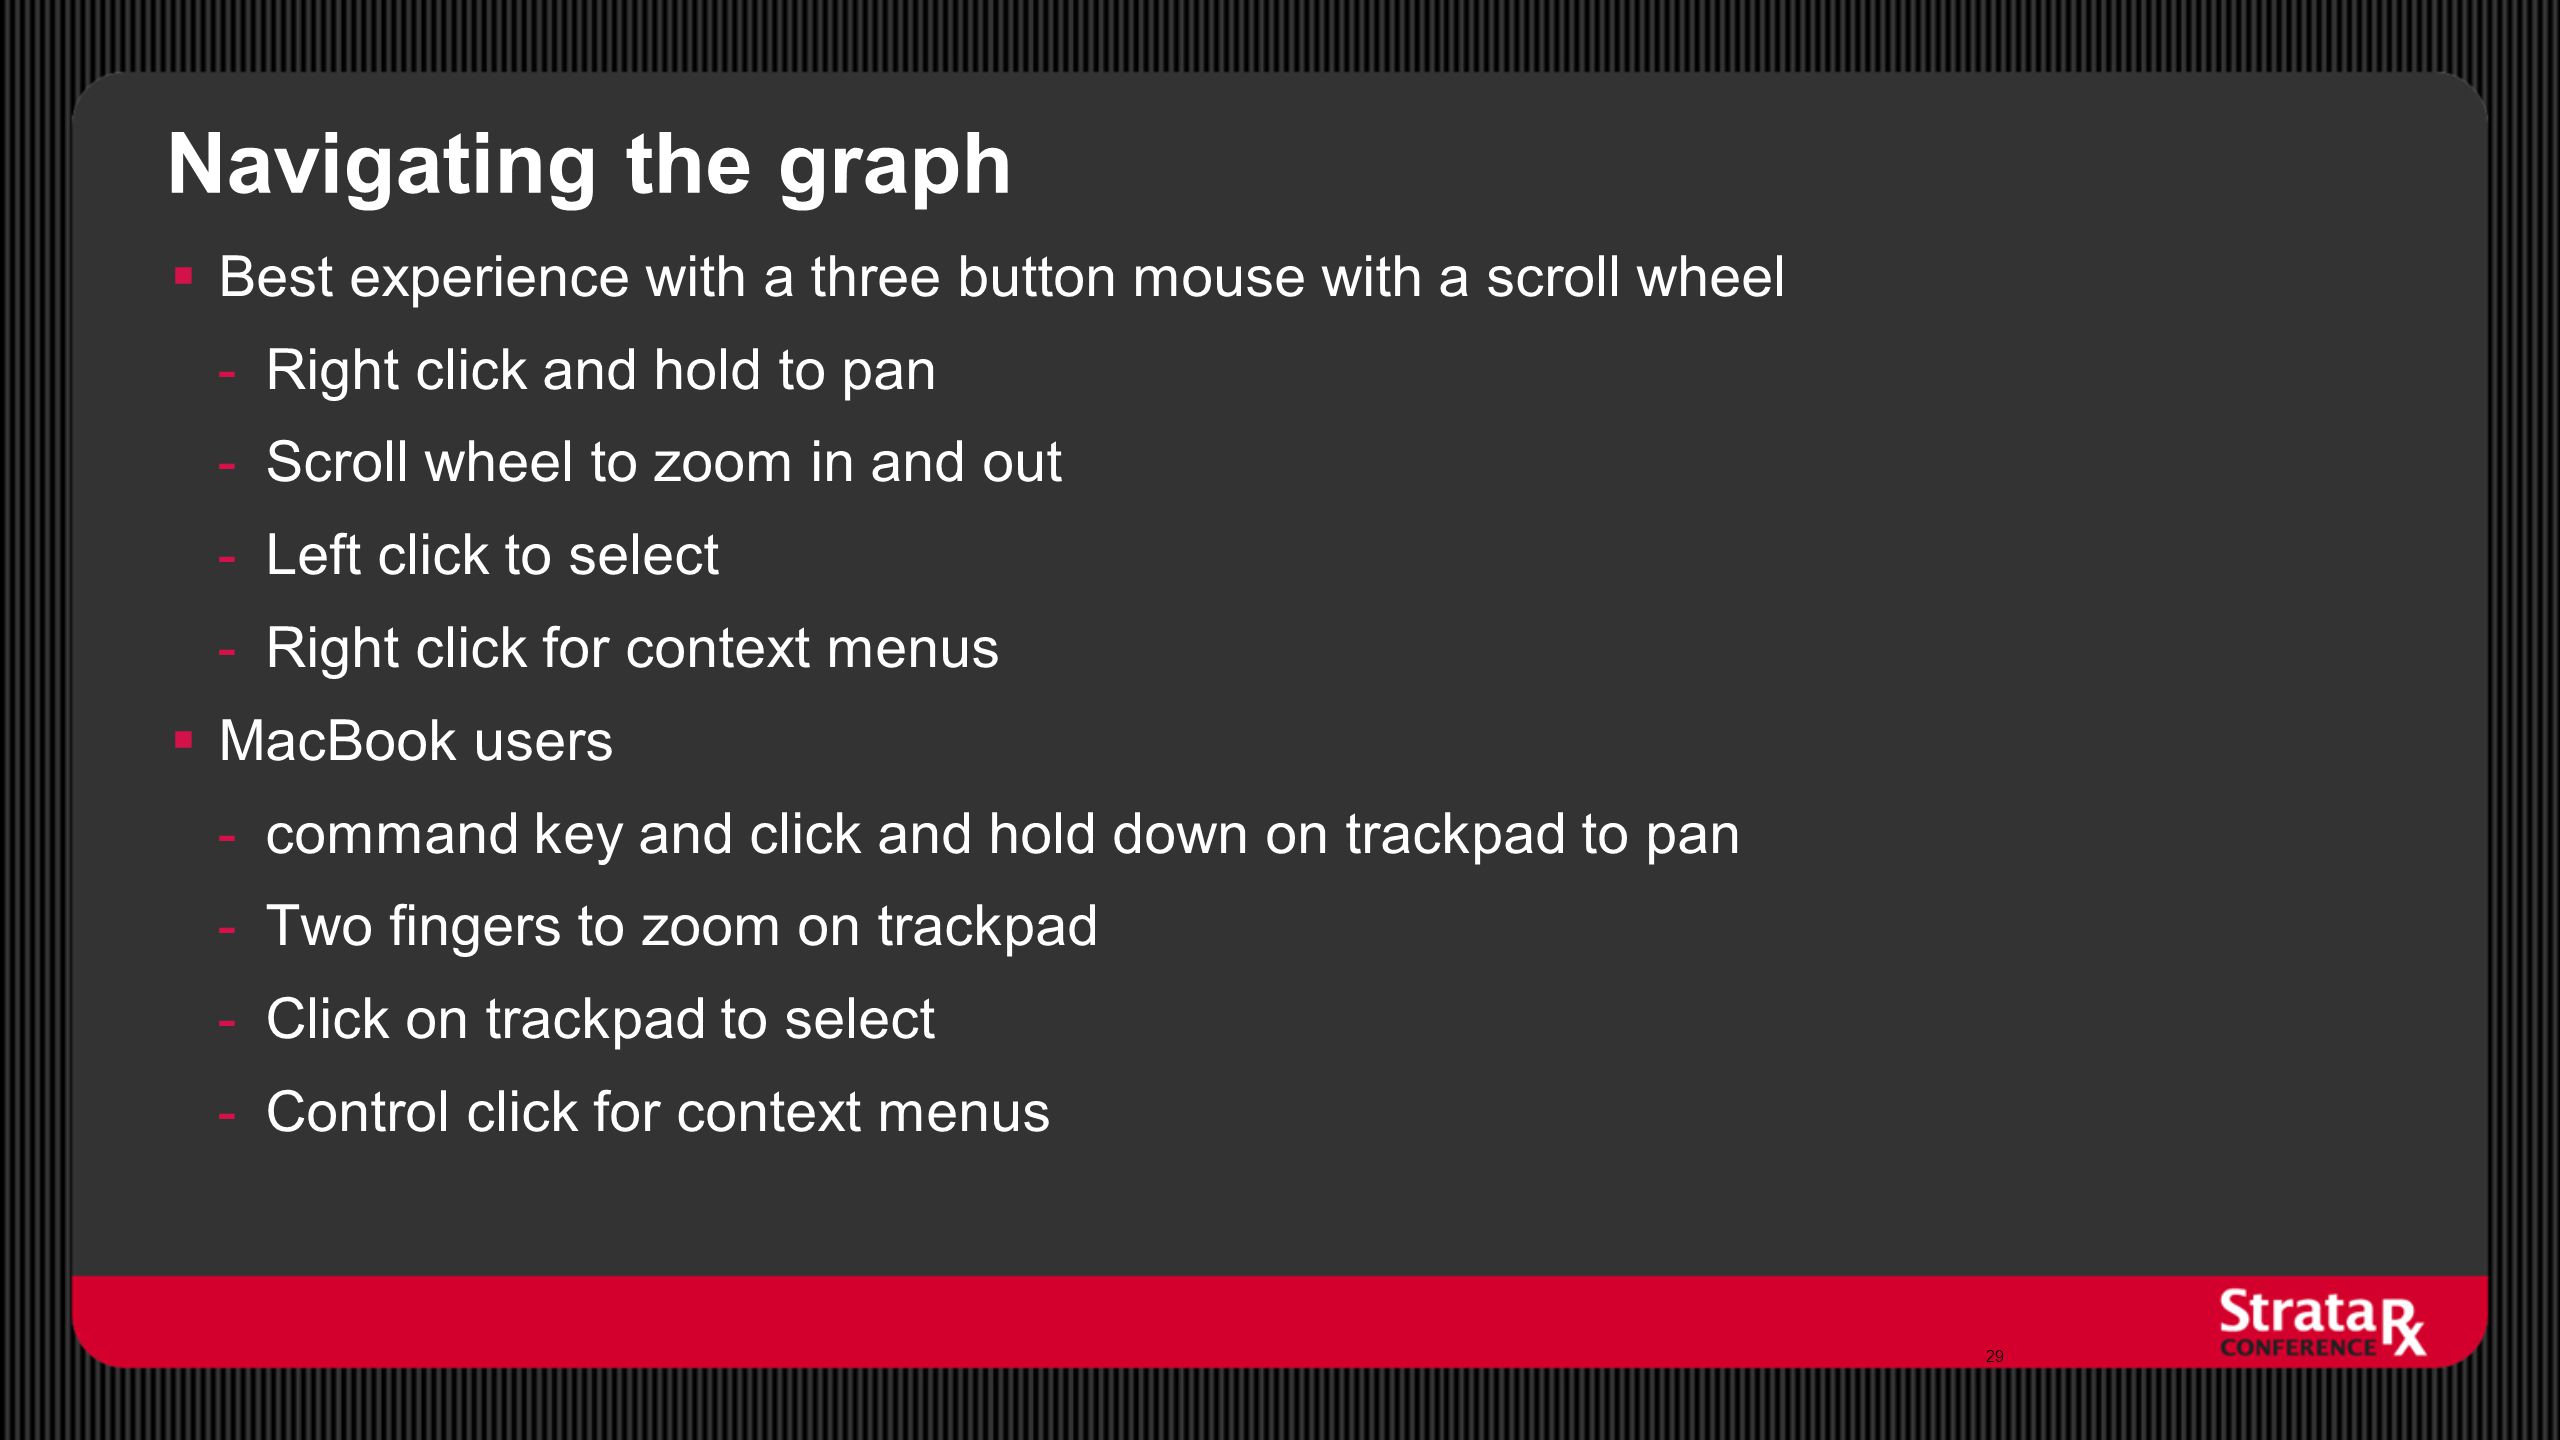 Navigating the graph  Best experience with a three button mouse with a scroll wheel -Right click and hold to pan -Scroll wheel to zoom in and out -Left click to select -Right click for context menus  MacBook users -command key and click and hold down on trackpad to pan -Two fingers to zoom on trackpad -Click on trackpad to select -Control click for context menus 29